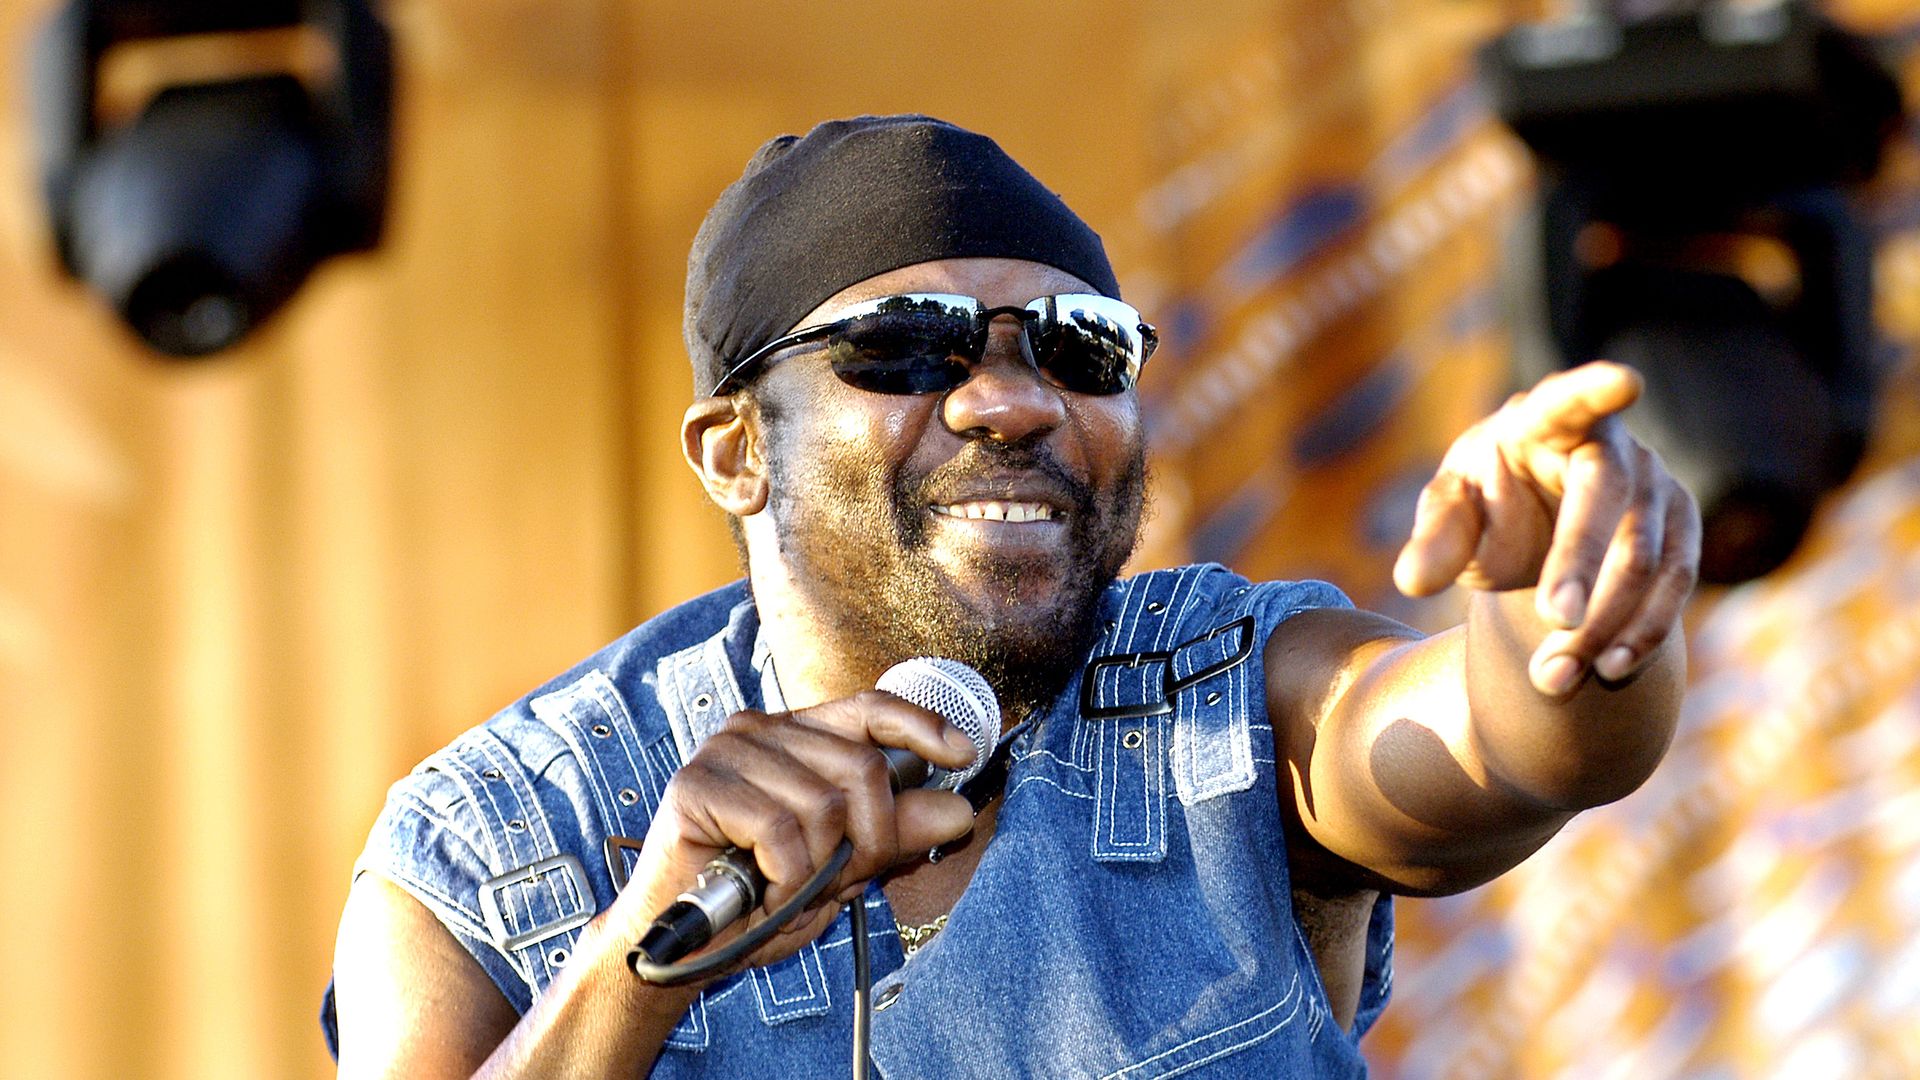 Your Love Ain't Fair av Toots And The Maytals 